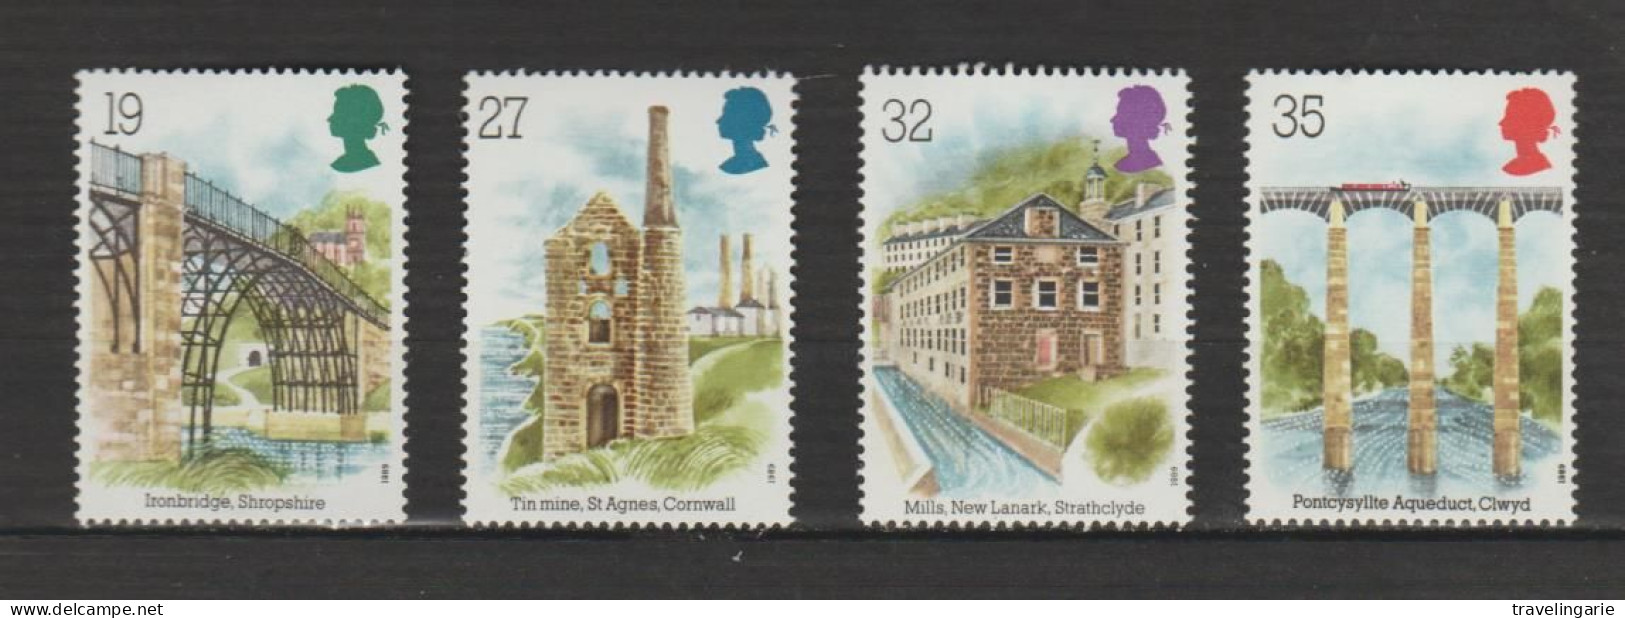 Great Britain 1989 Industrial Archeology MNH ** - Unused Stamps